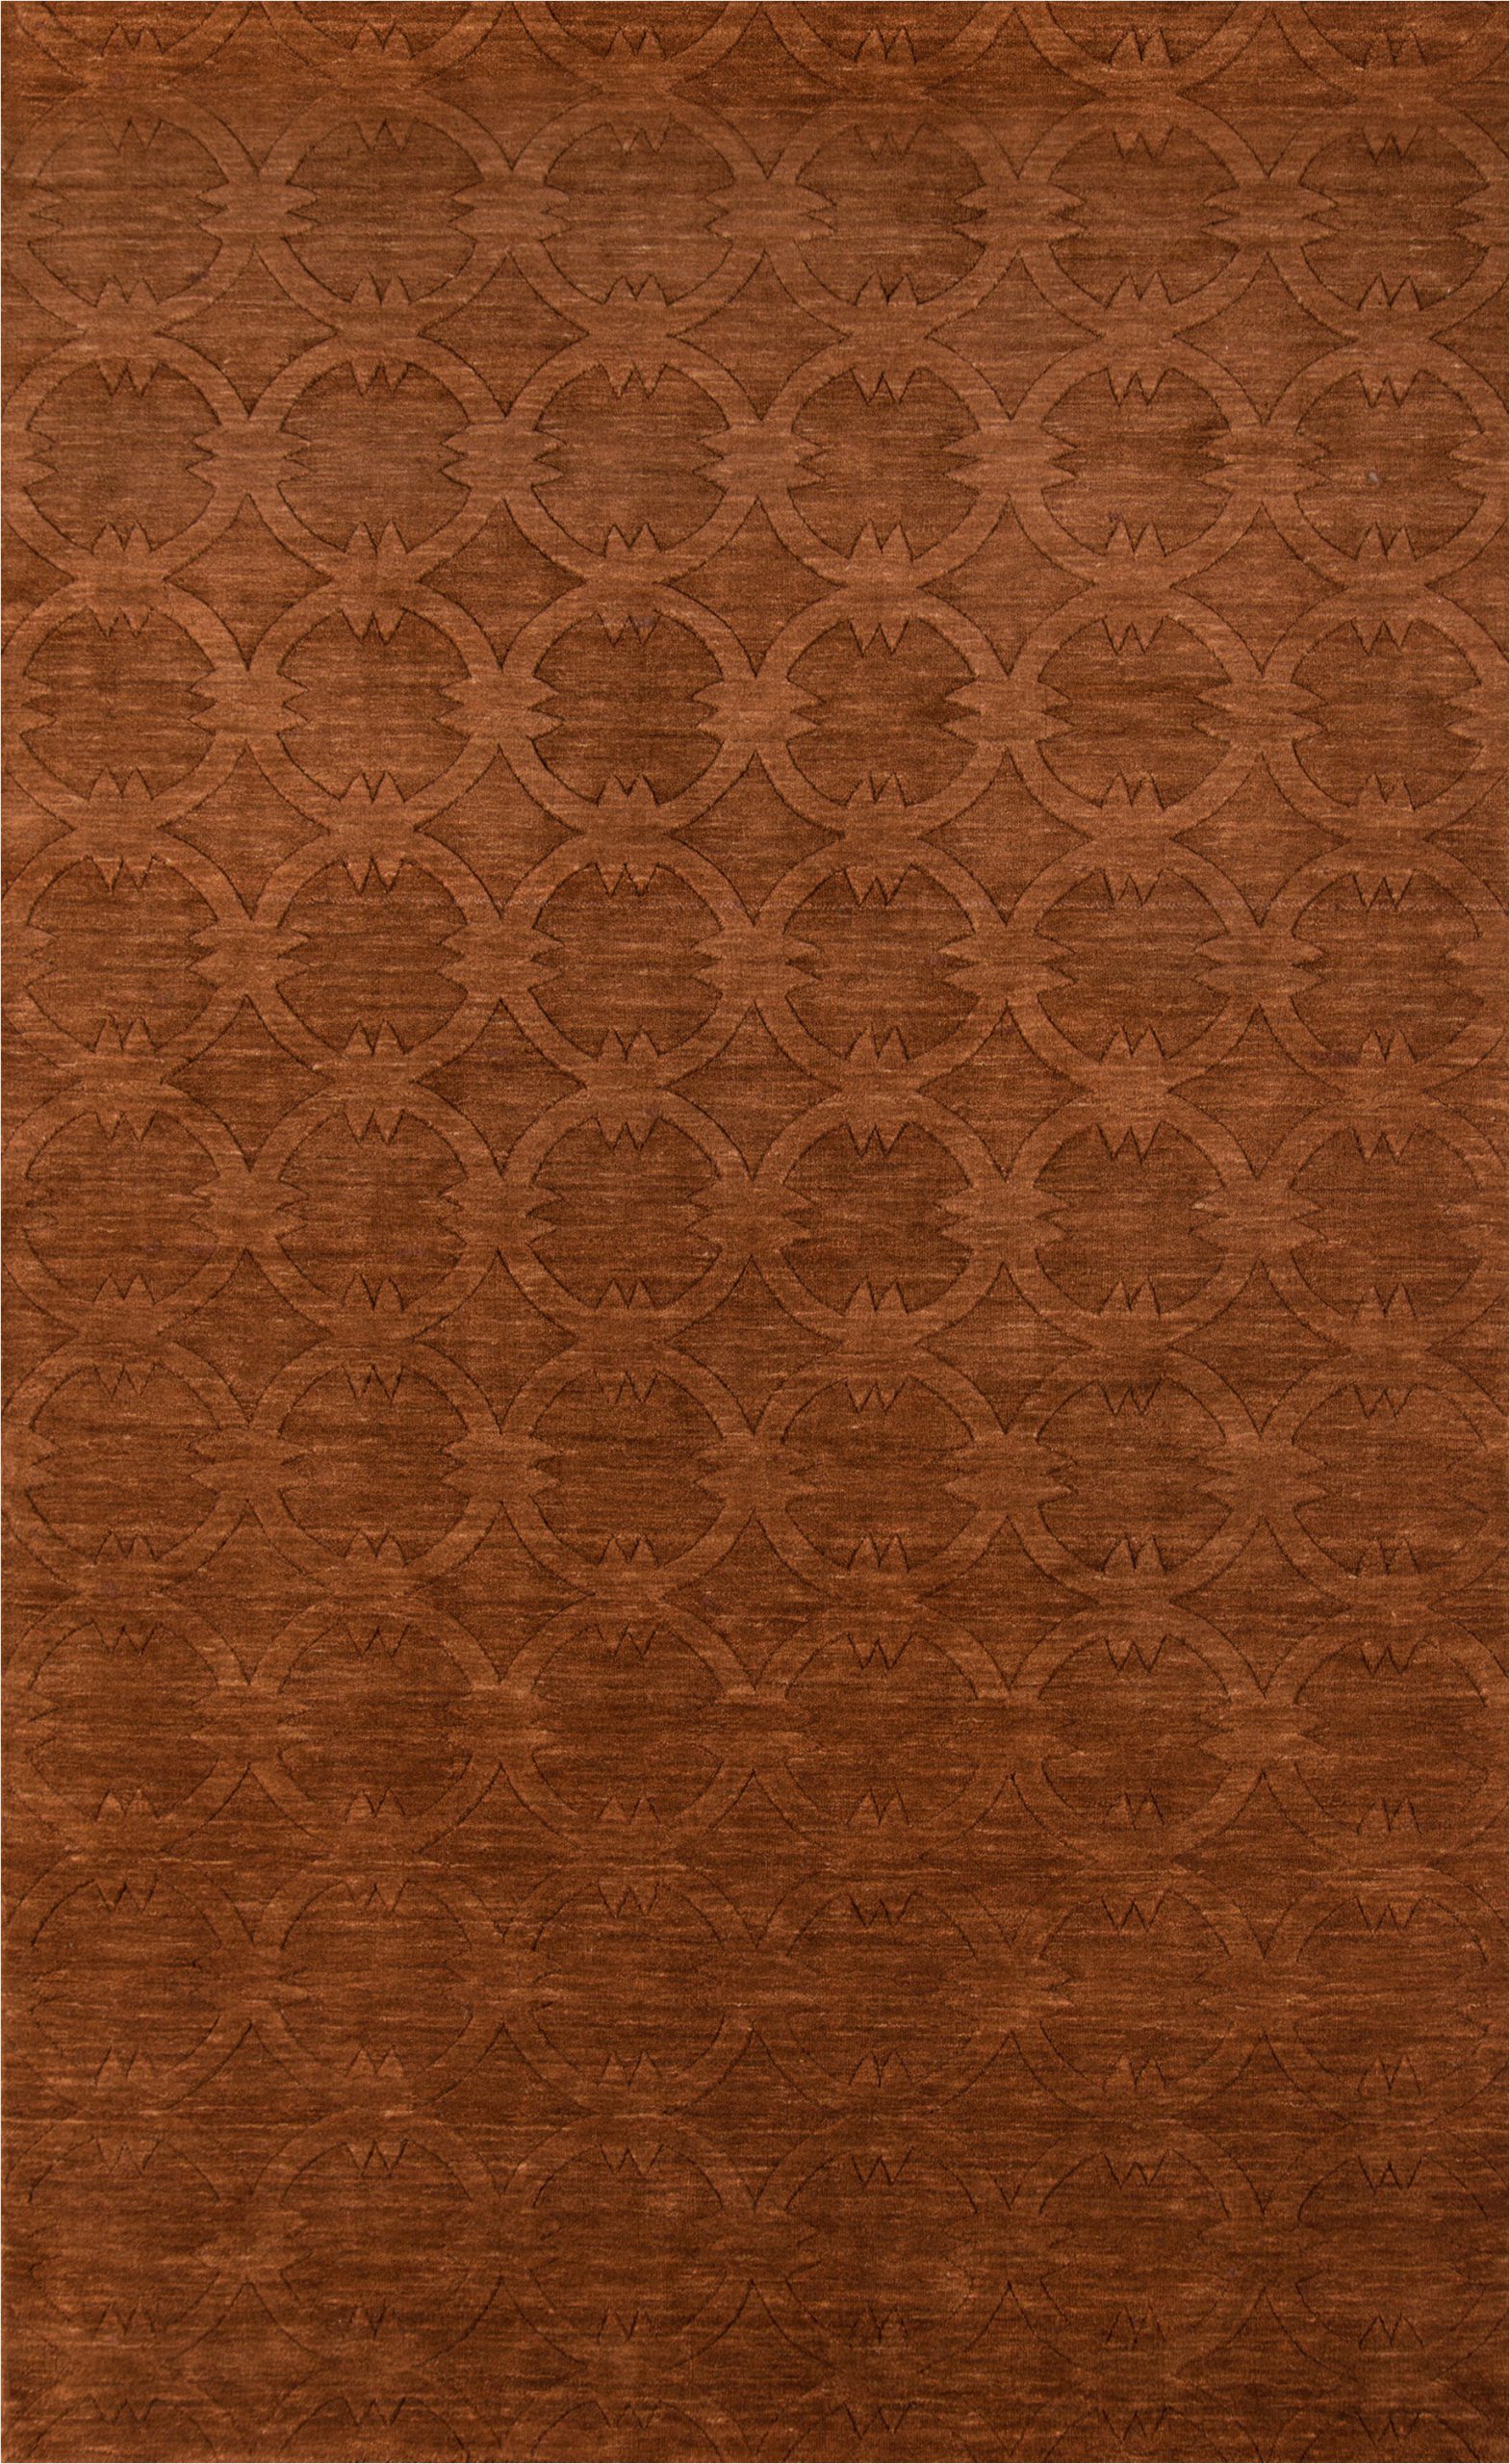 Copper Color Bath Rugs Amacker Hand Loomed Wool Copper area Rug